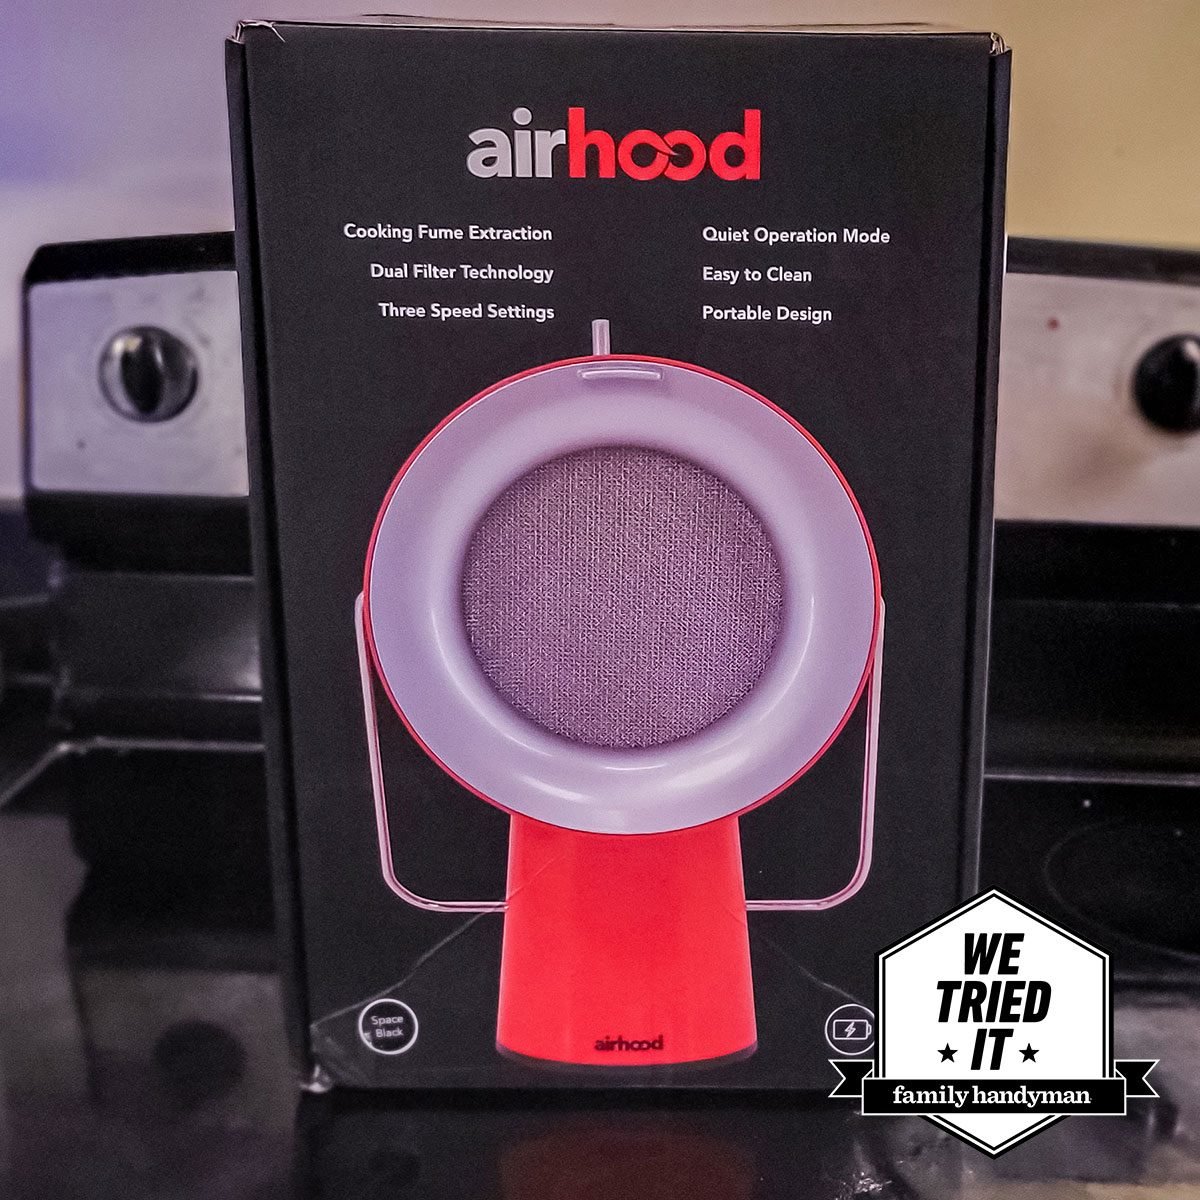 I Tried the AirHood Portable Kitchen Air Cleaner and It's Life Changing